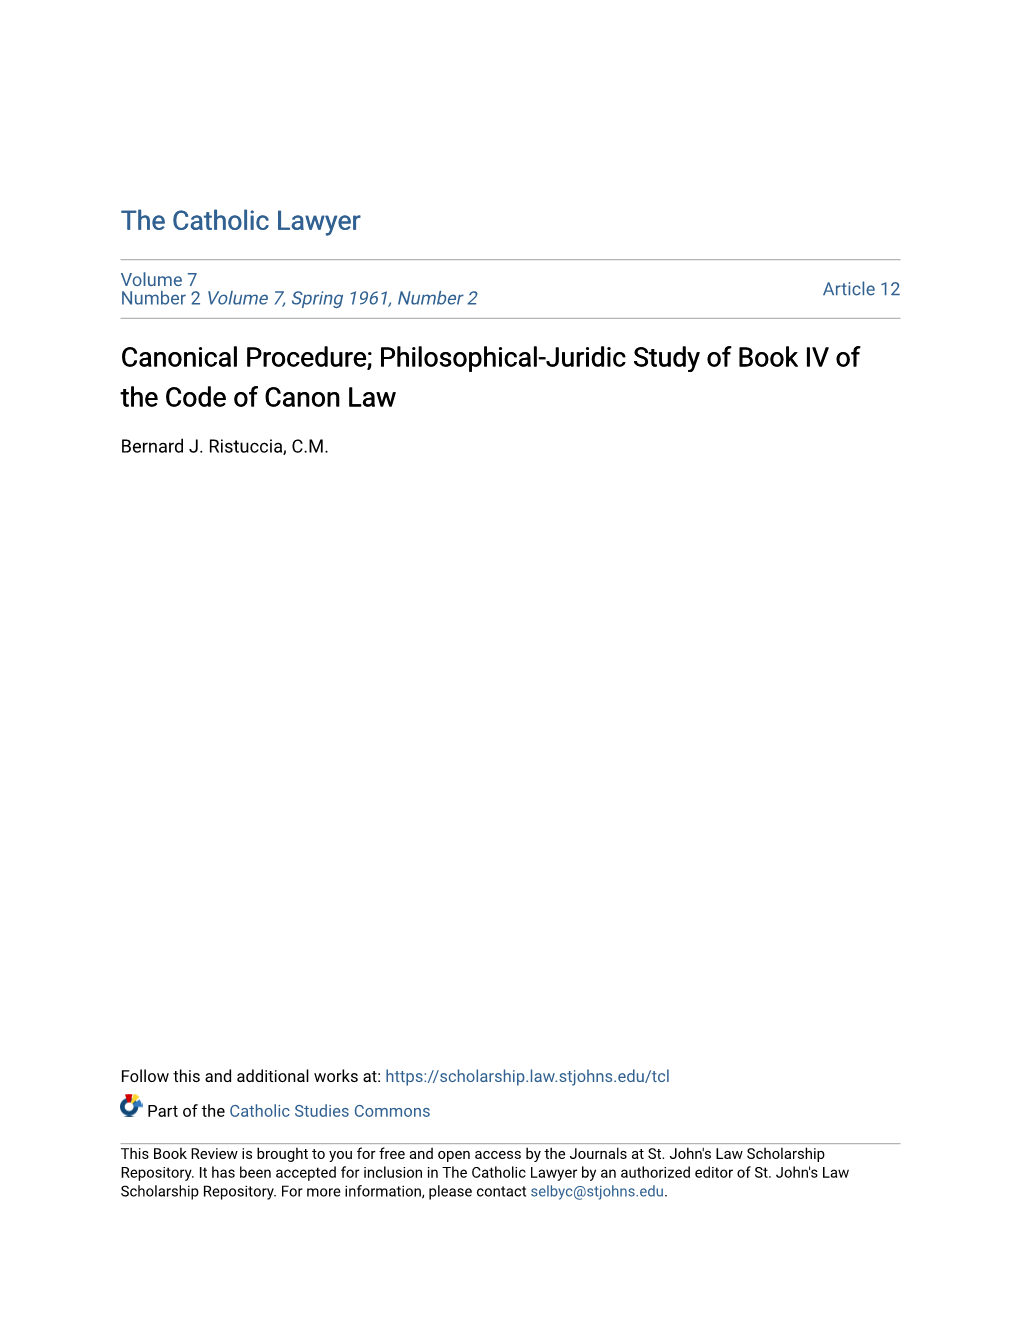 Philosophical-Juridic Study of Book IV of the Code of Canon Law